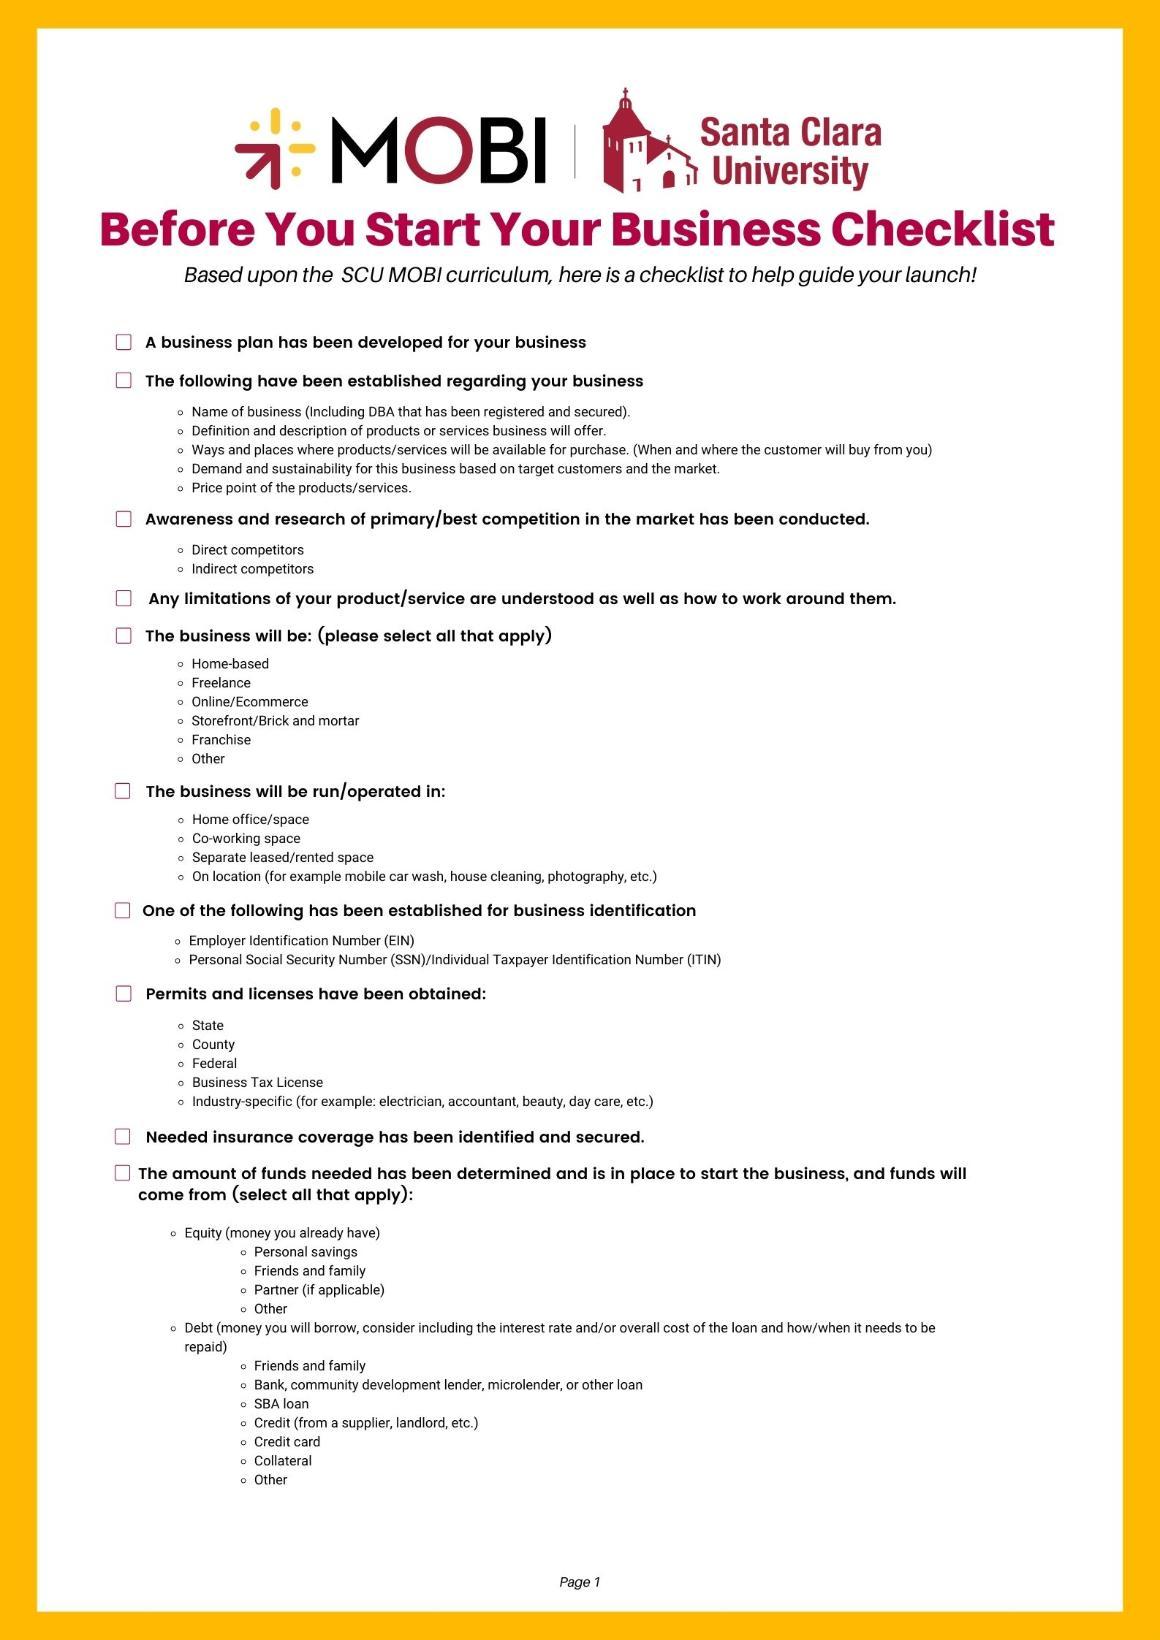 Checklist for starting your business jpg image version Page 1